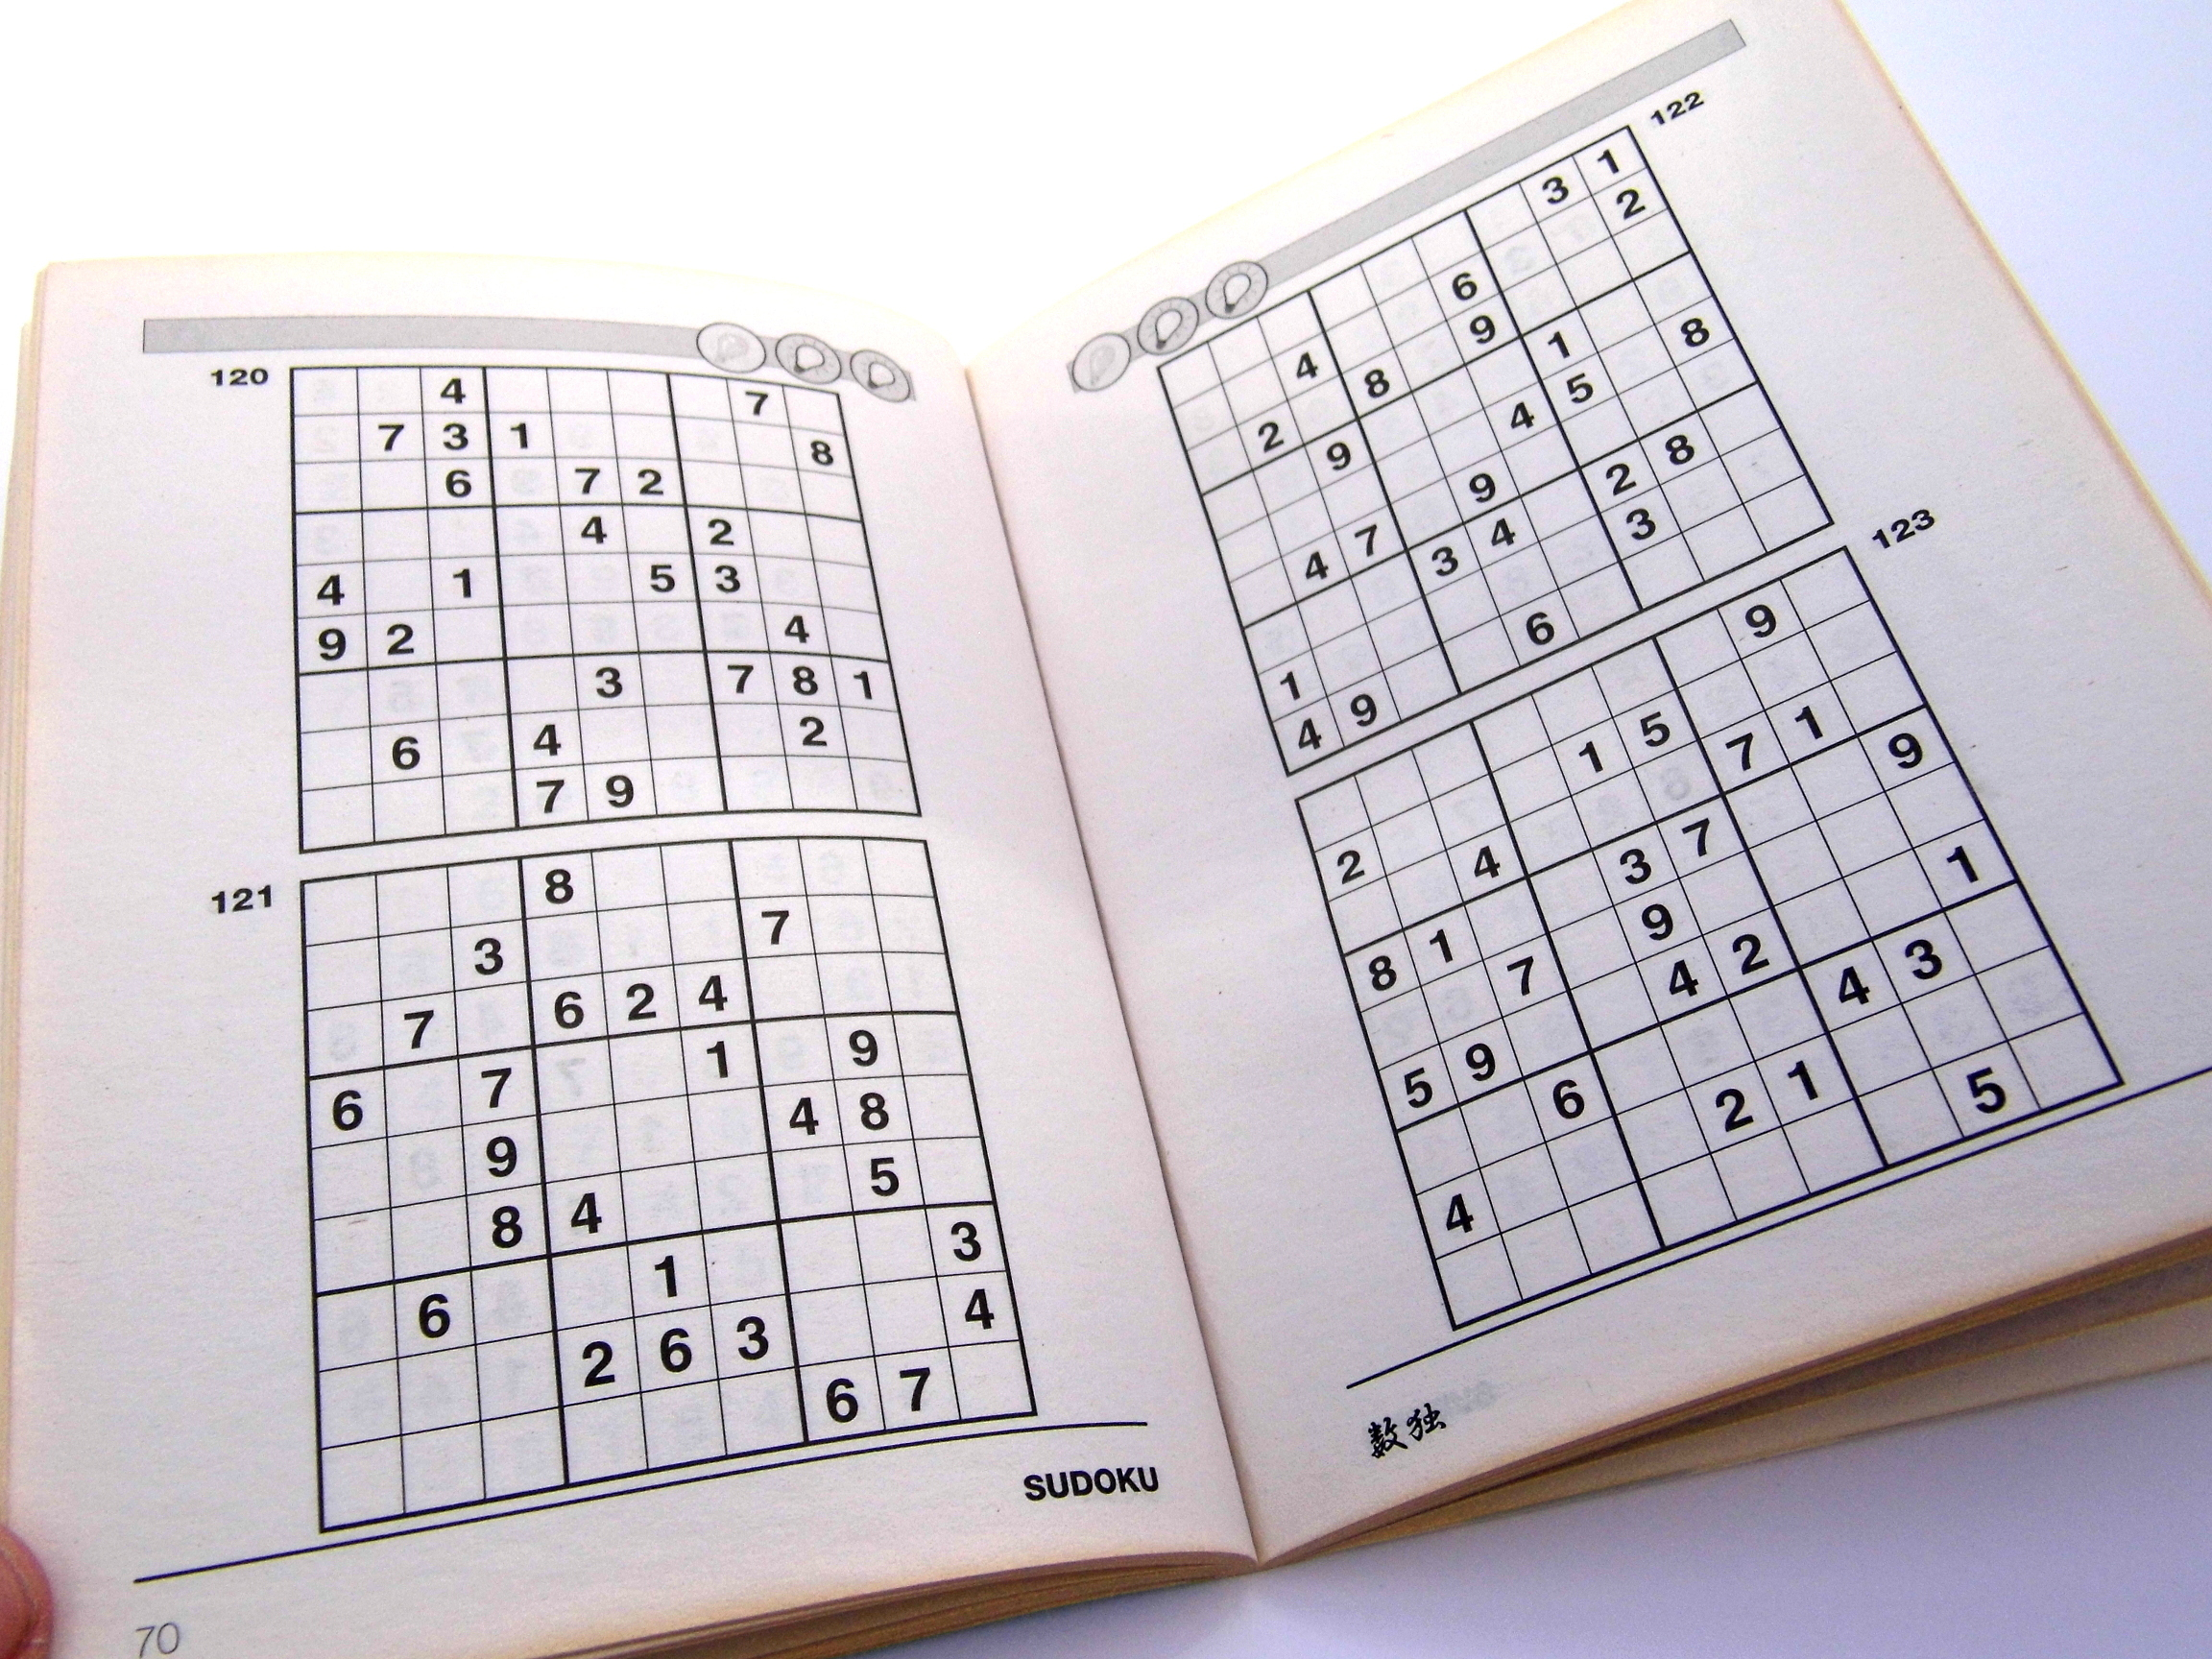 Archive Puzzles – 12 Hard Sudoku Puzzles – Books 11 To 20